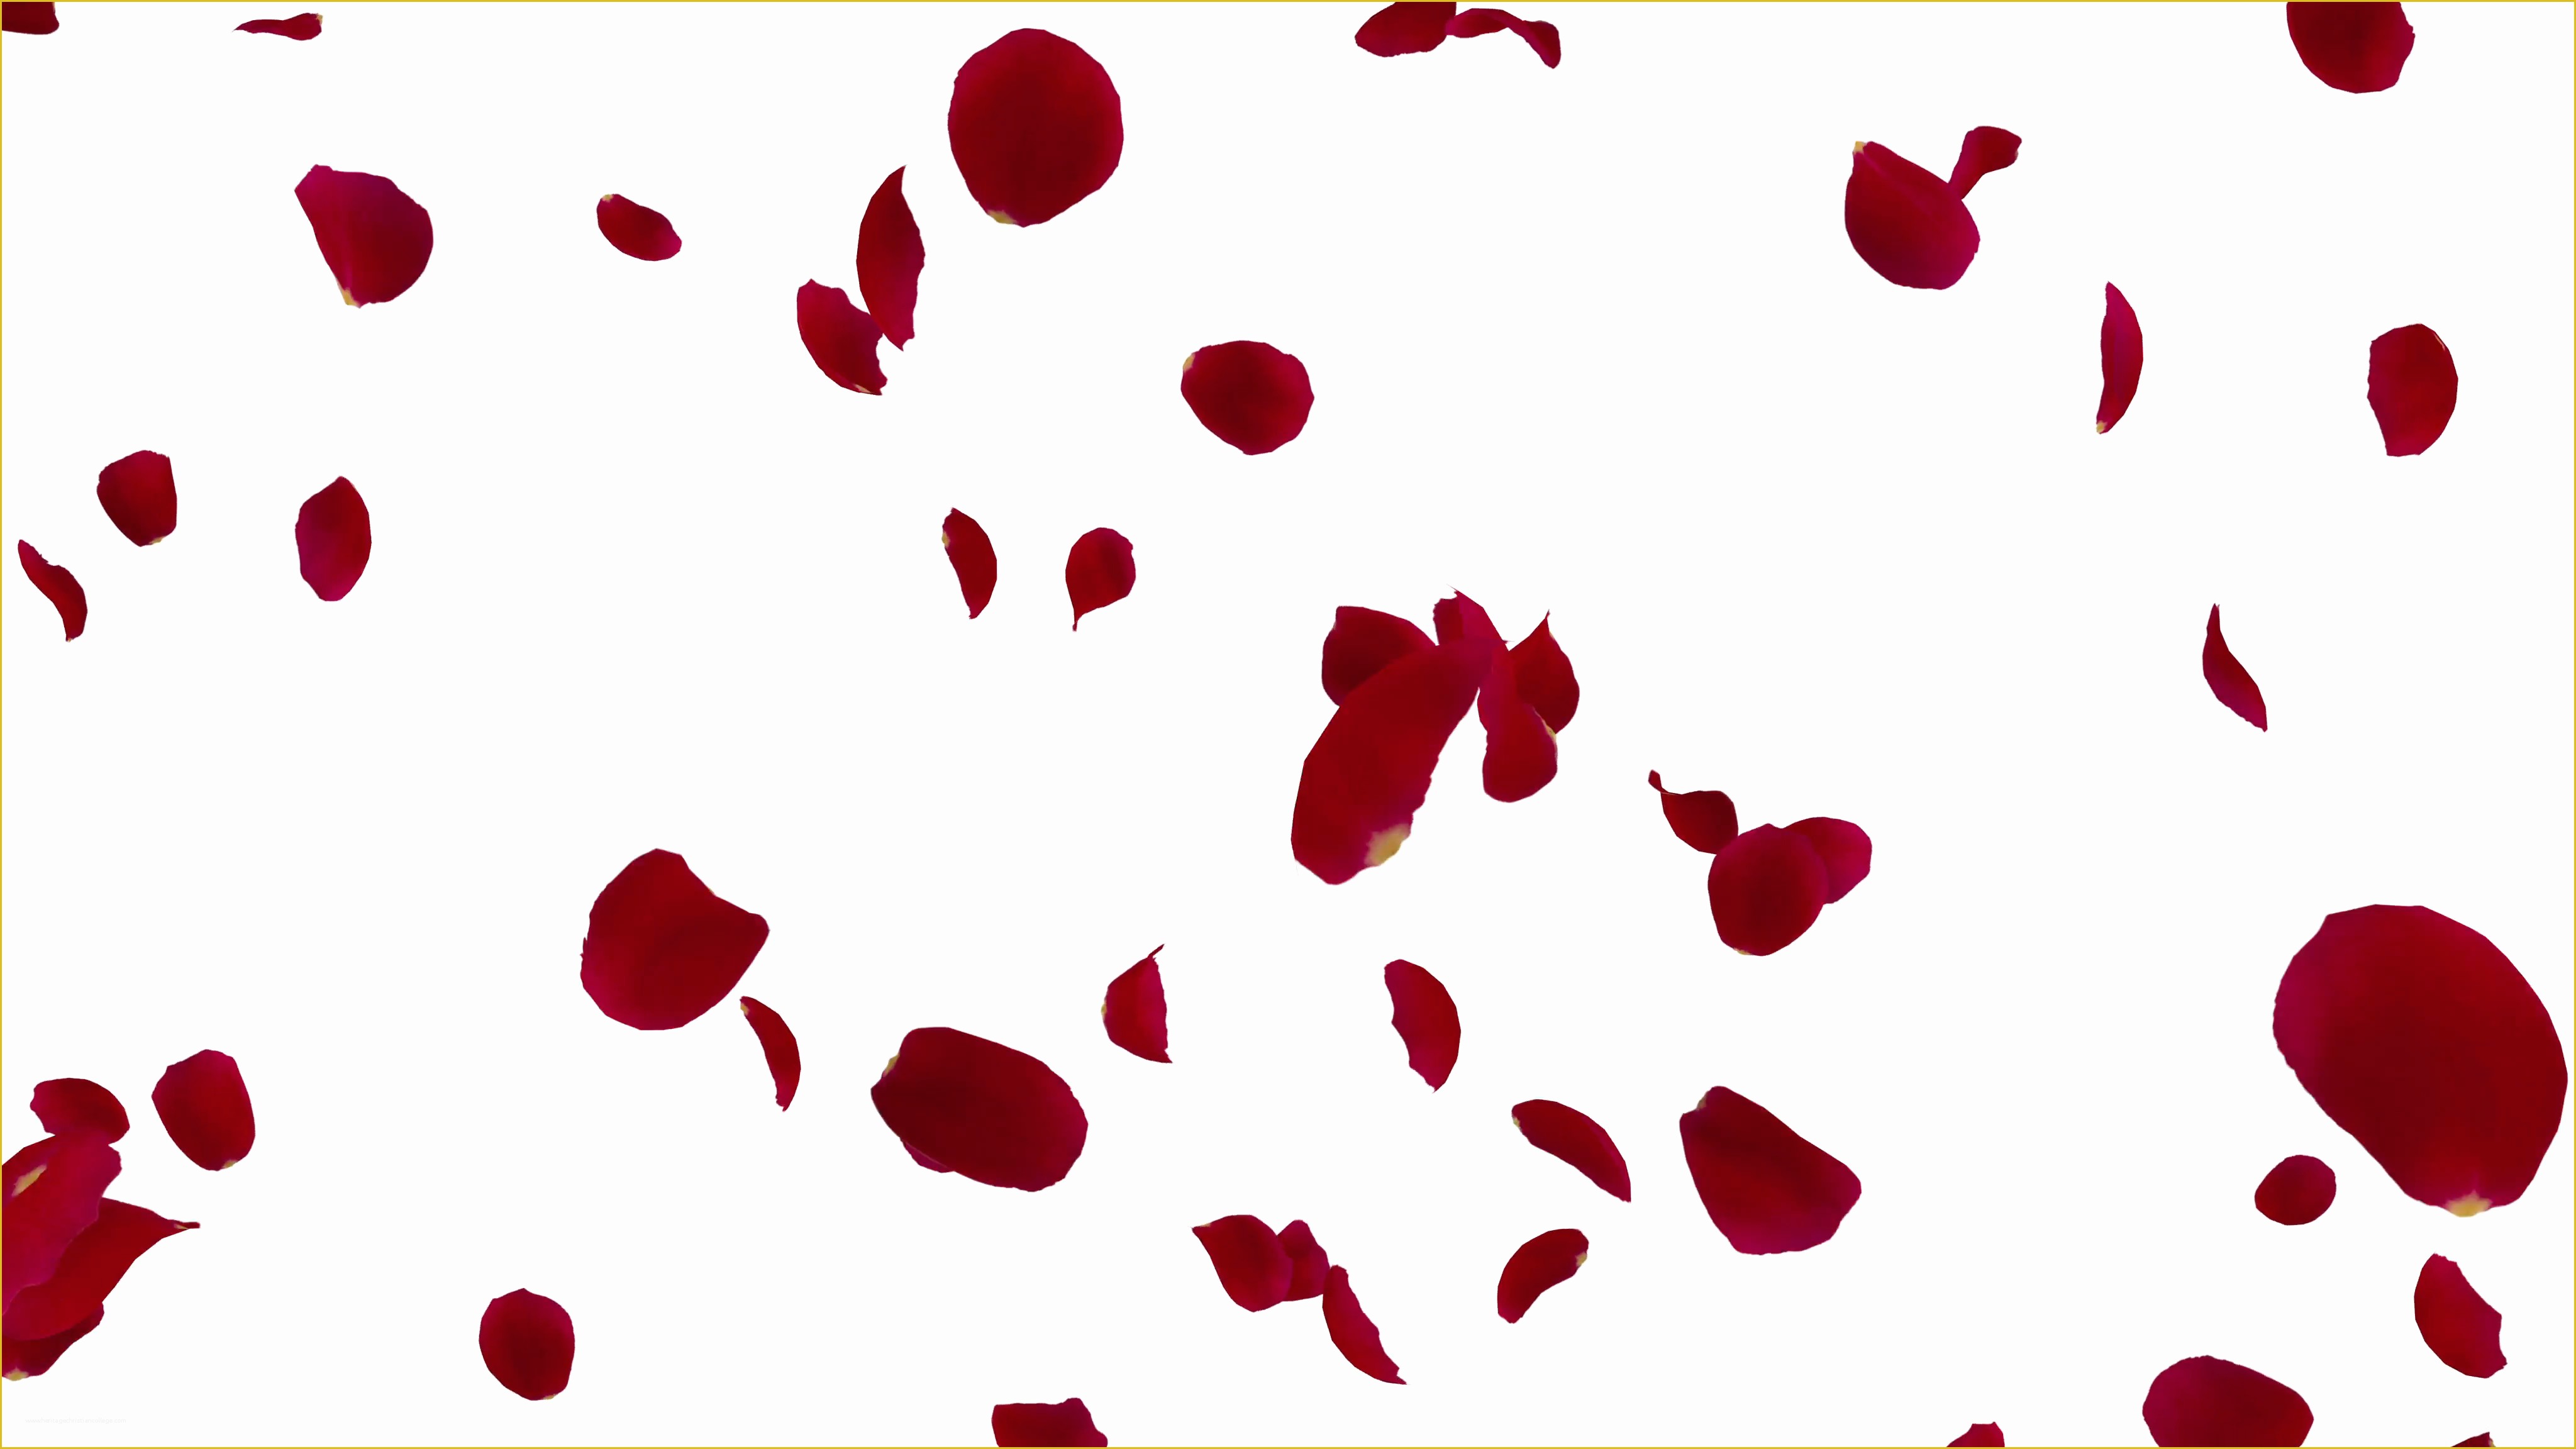 Falling Flower Petals after Effects Template Free Of Rose Petals Red tornado Fw 4k Motion Background